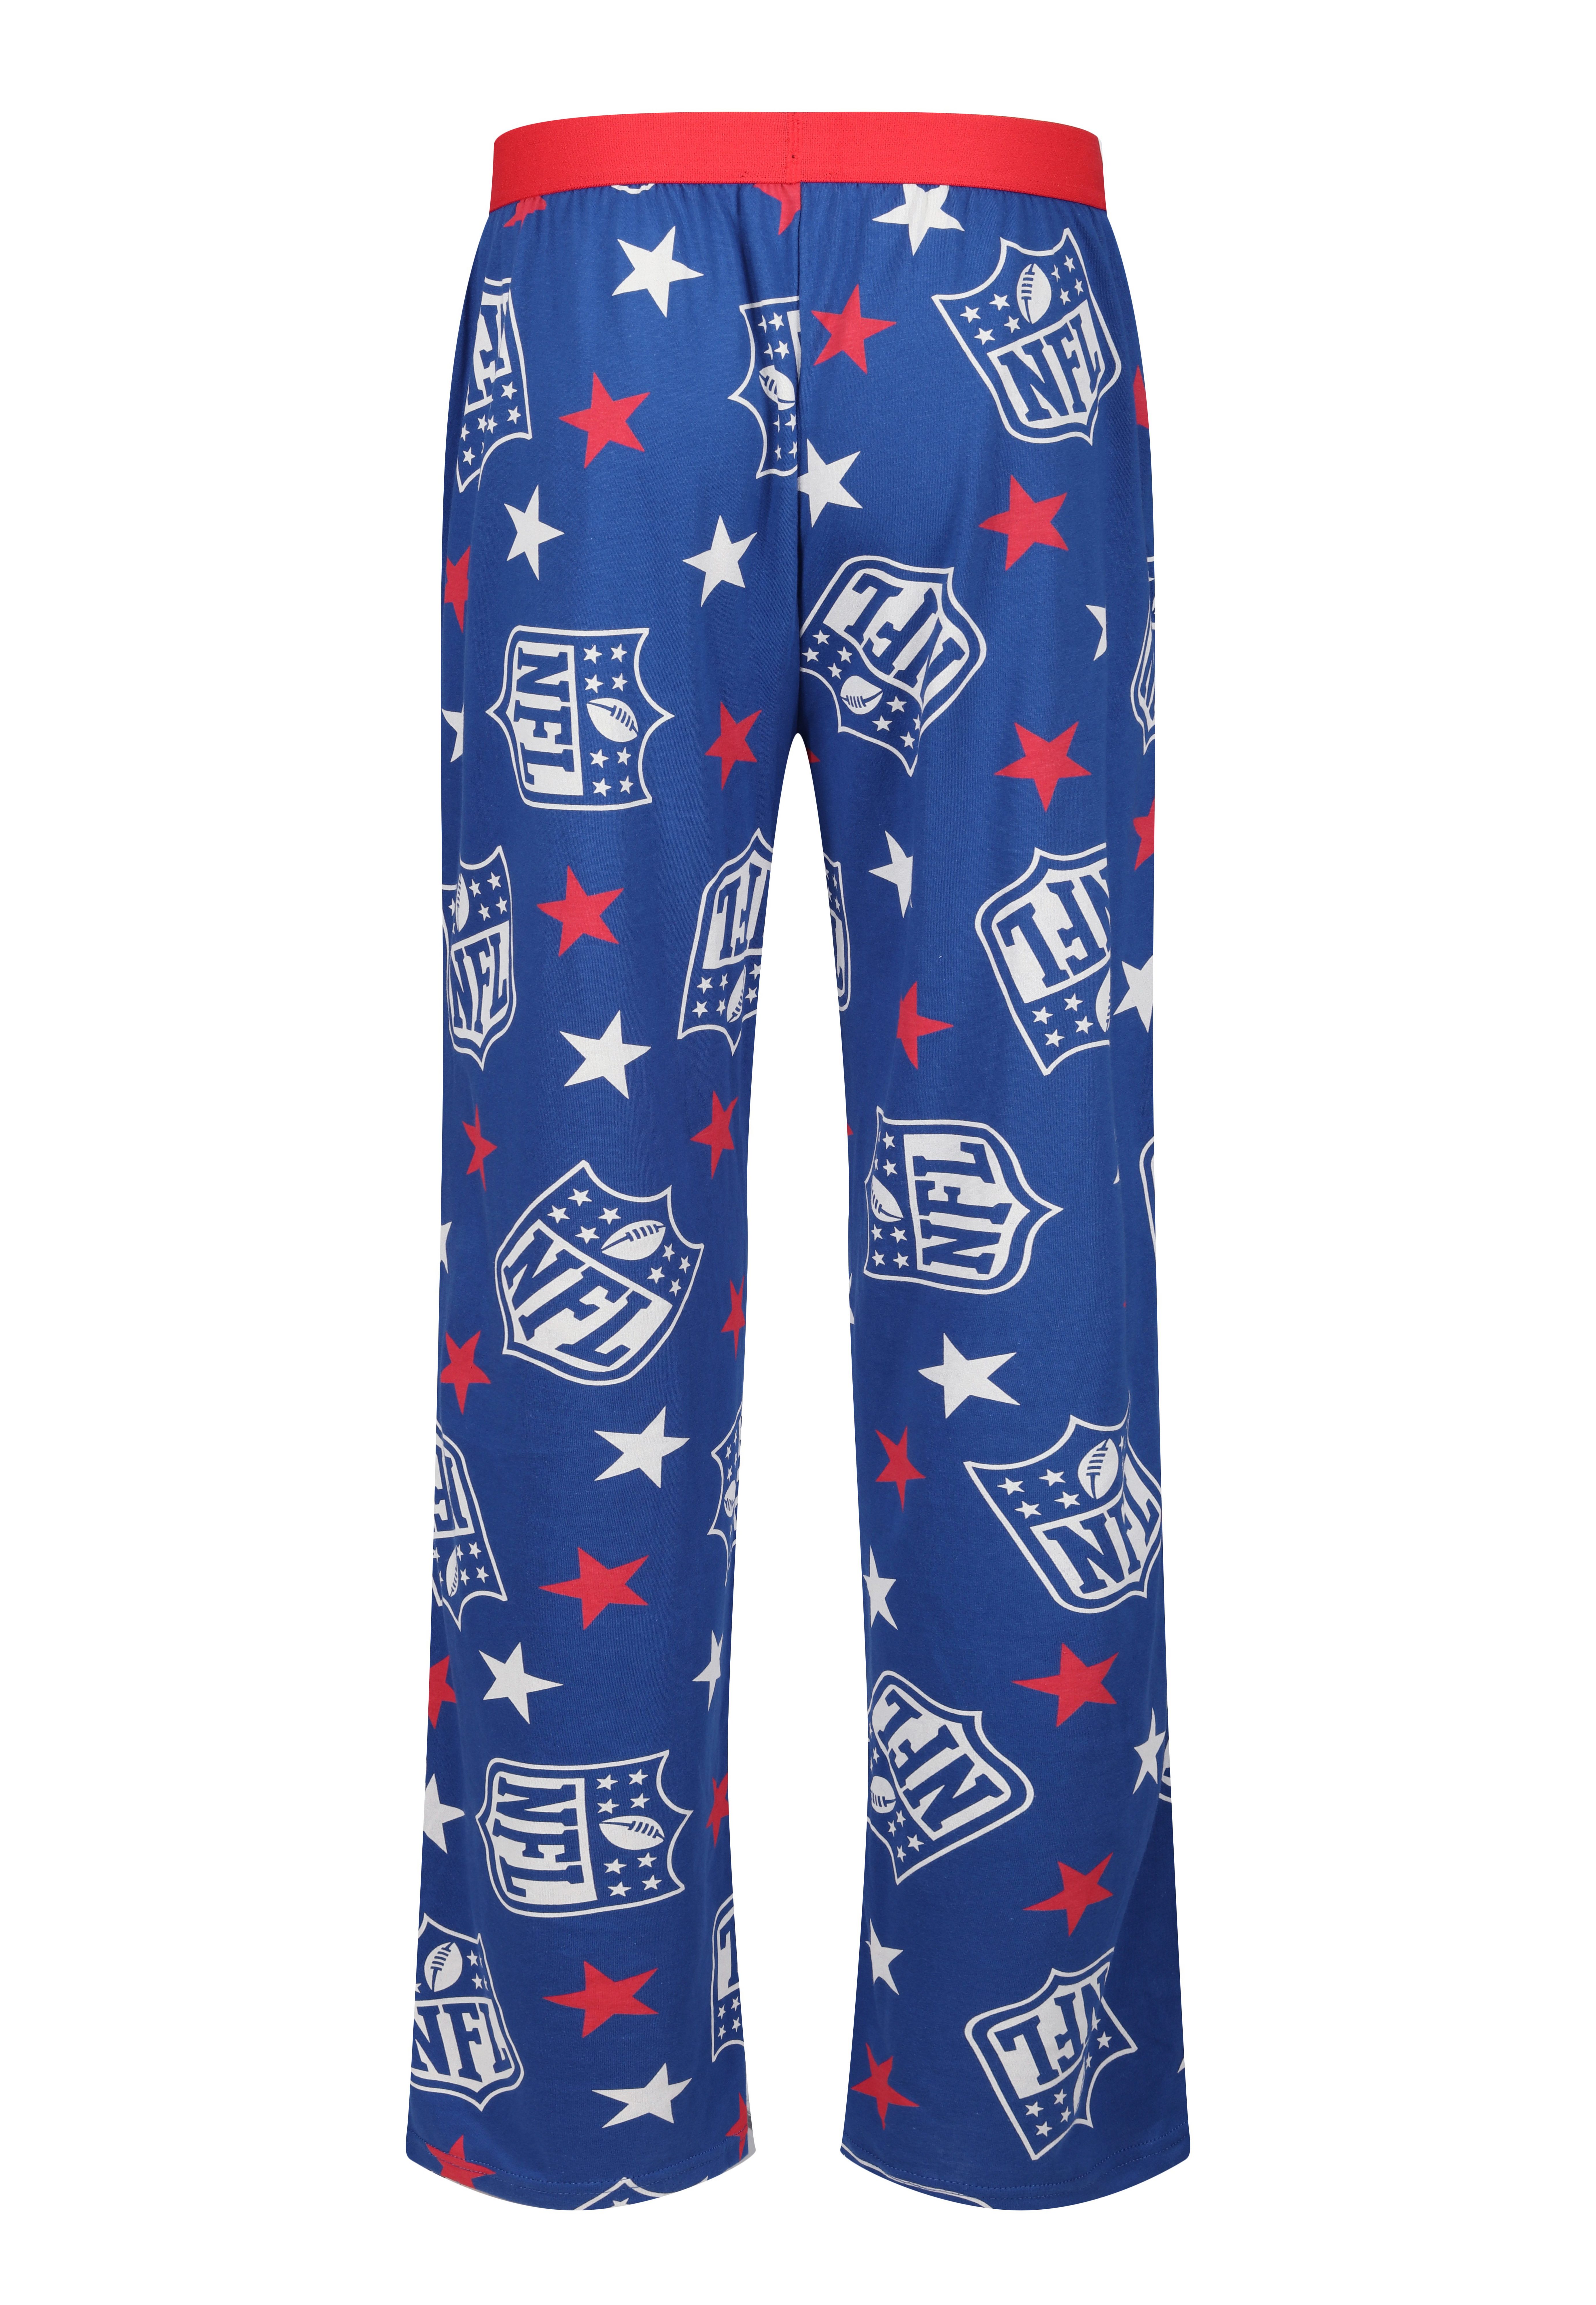 and Navy Loungepants Shield Loungepants NFL Recovered Stars